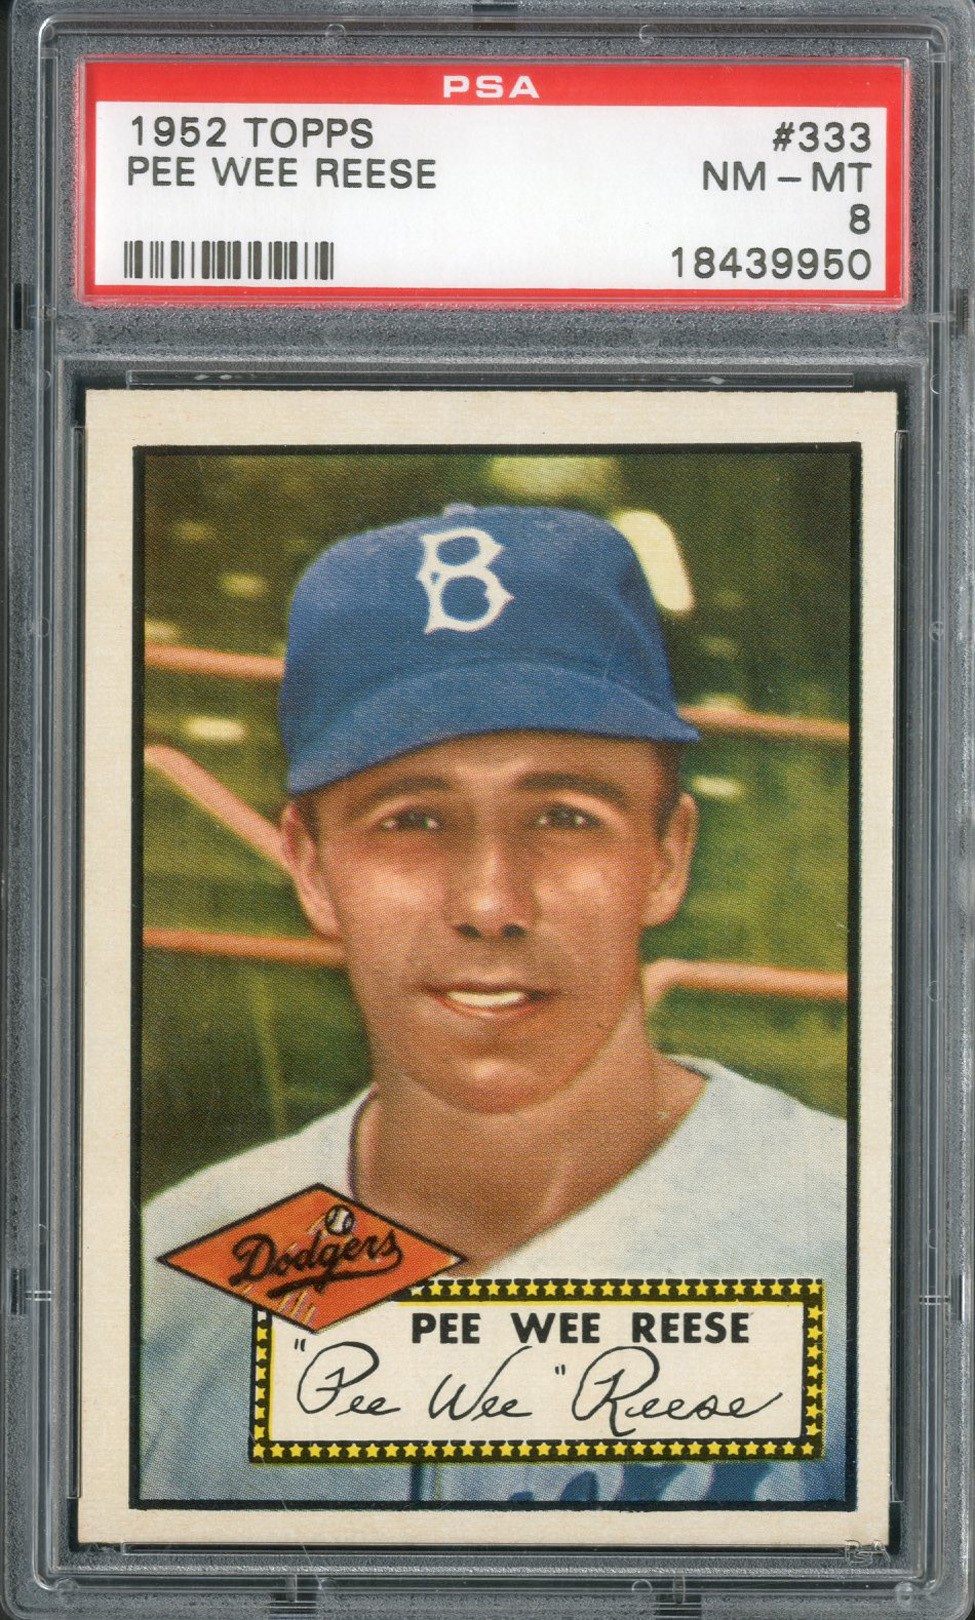 Baseball and Trading Cards - 1952 Topps #333 Pee Wee Reese - PSA NM-MT 8